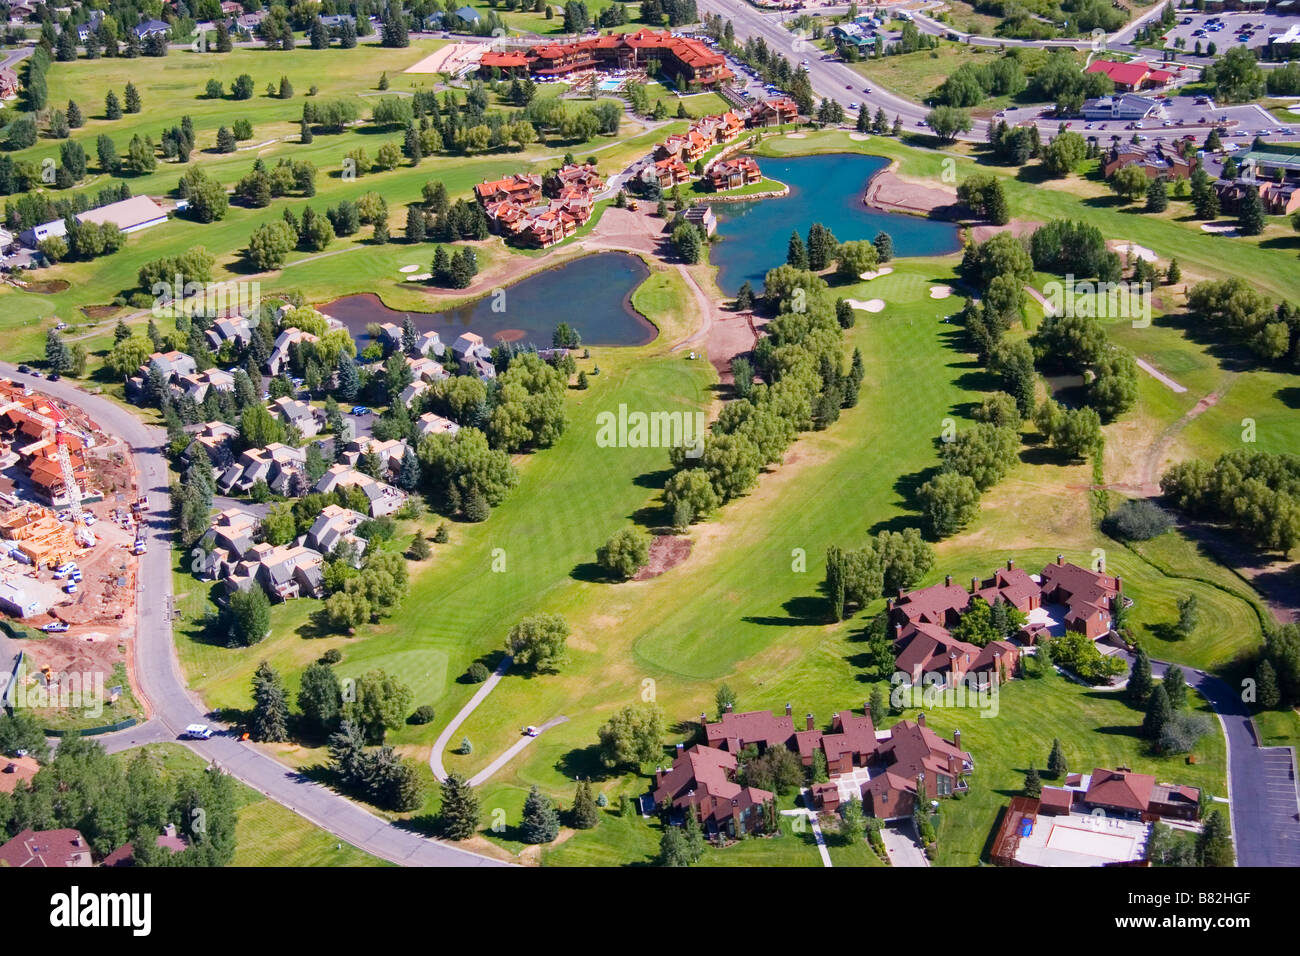 Aerial view of the the Park City Golf Course a year round resort and recreation center in the Wasatch Mountains of northern Utah Stock Photo